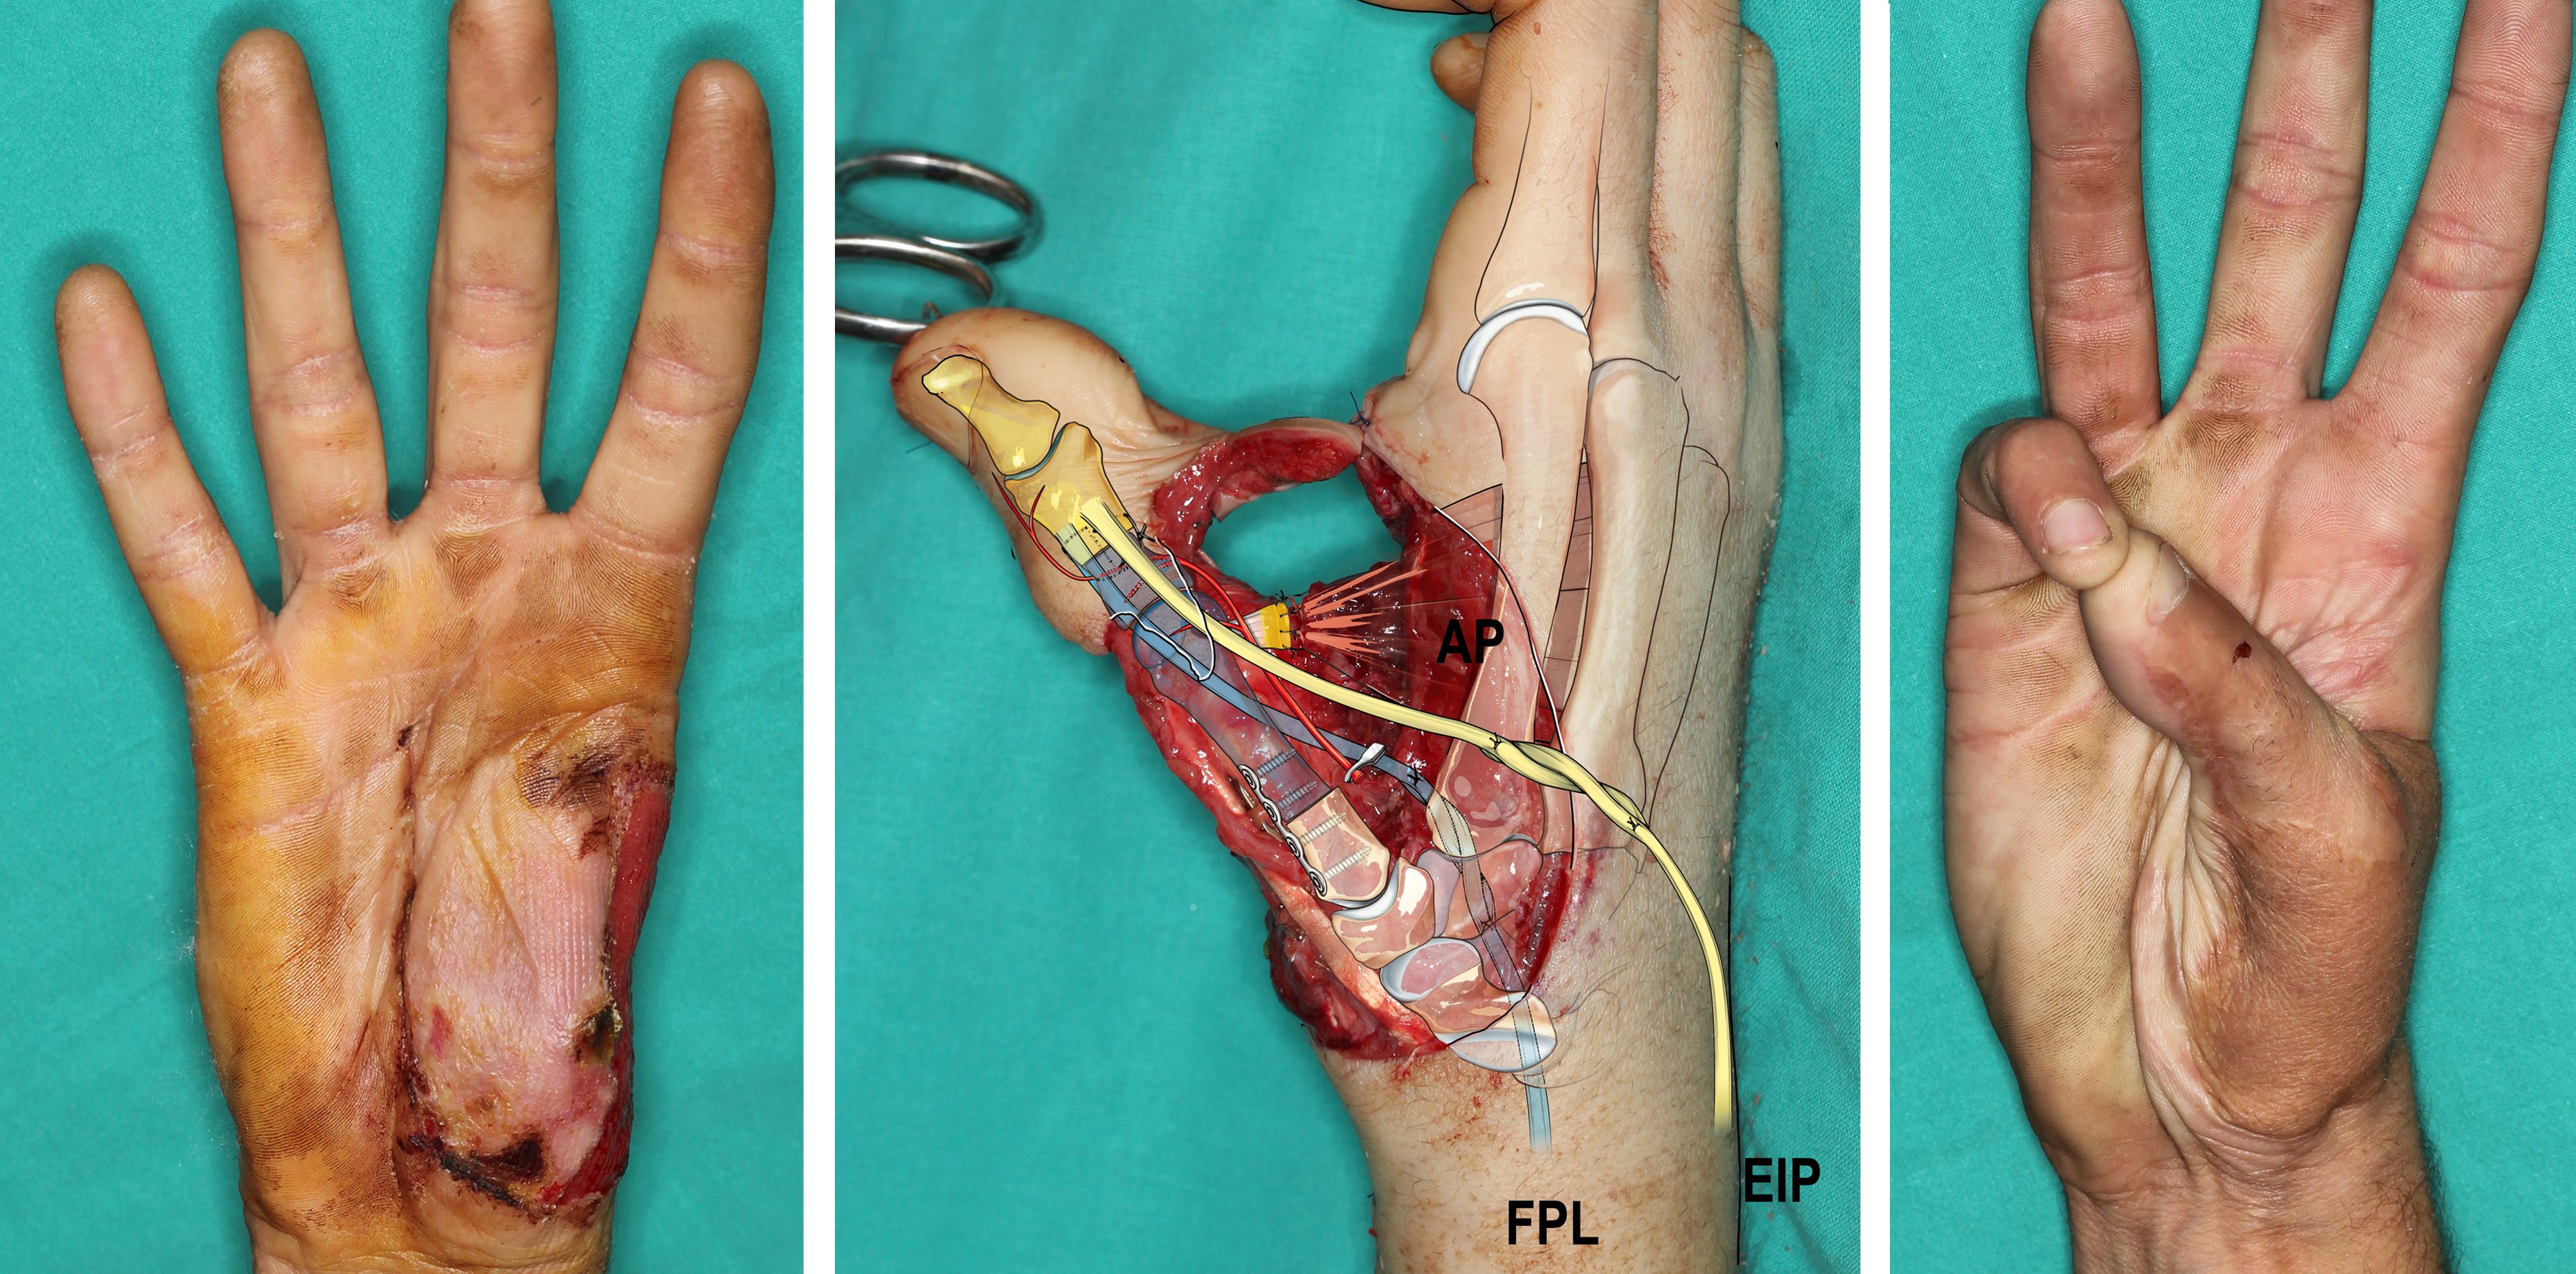 Thumb reconstruction in the subacute period